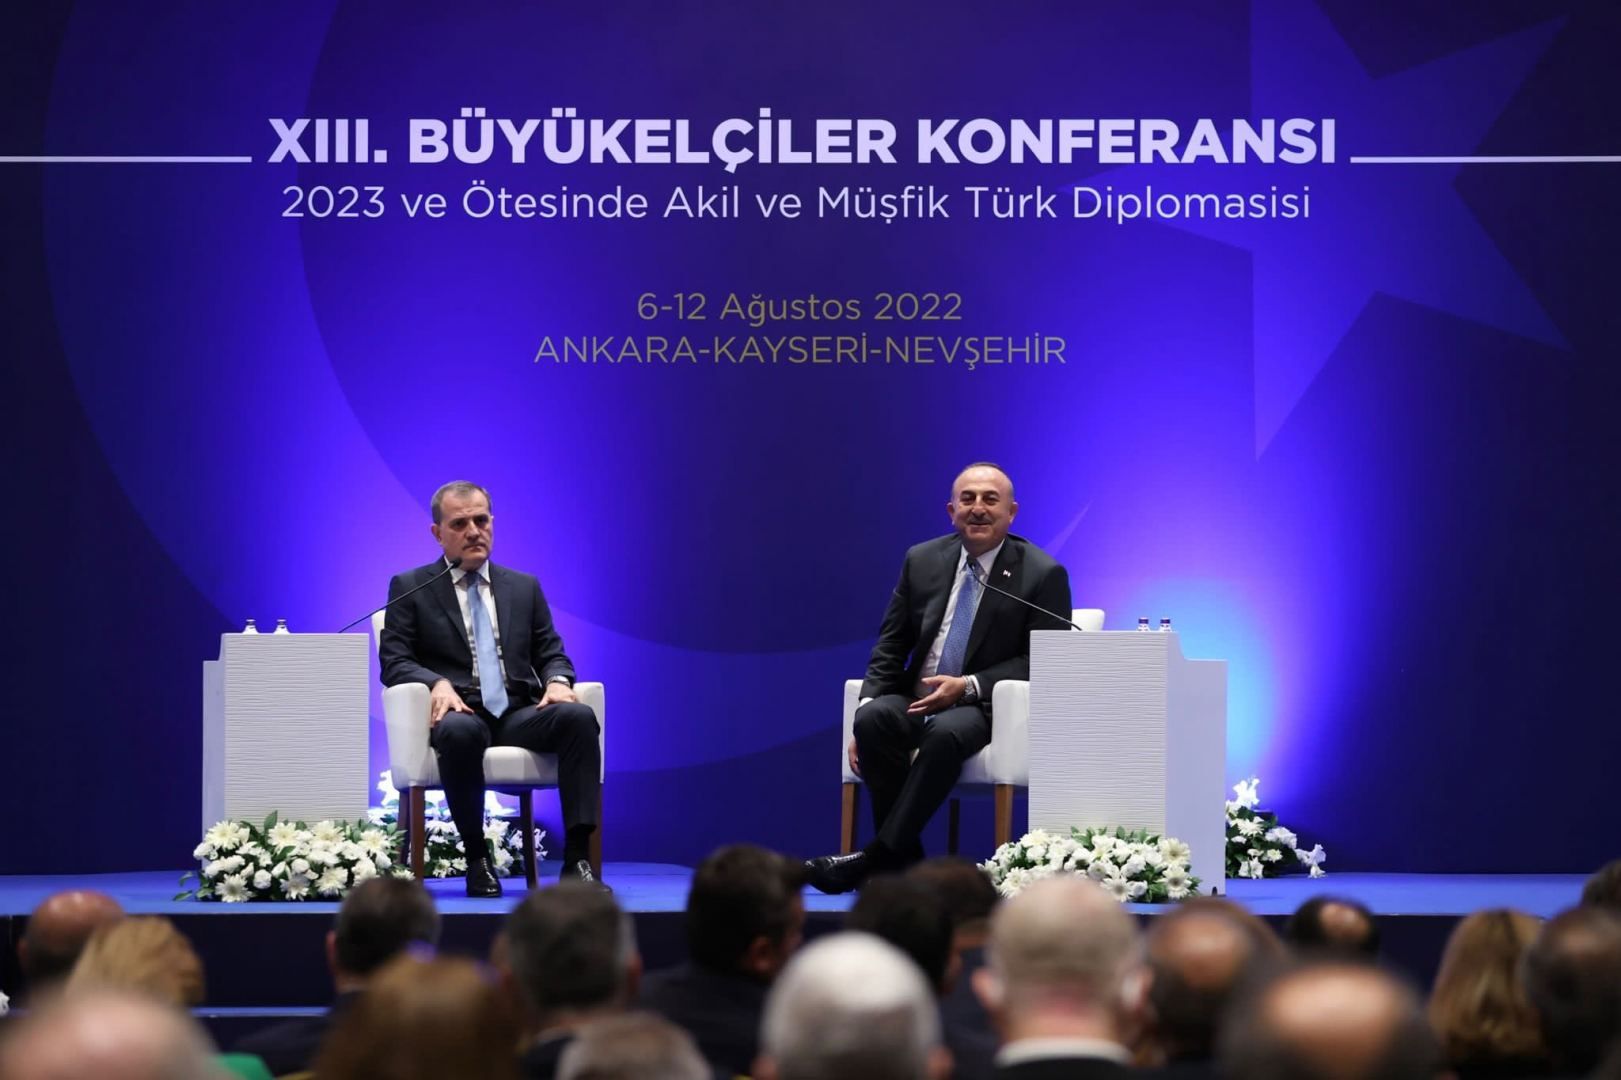 Azerbaijani-Turkish alliance aimed at bolstering regional peace, security - foreign minister [PHOTO] - Gallery Image